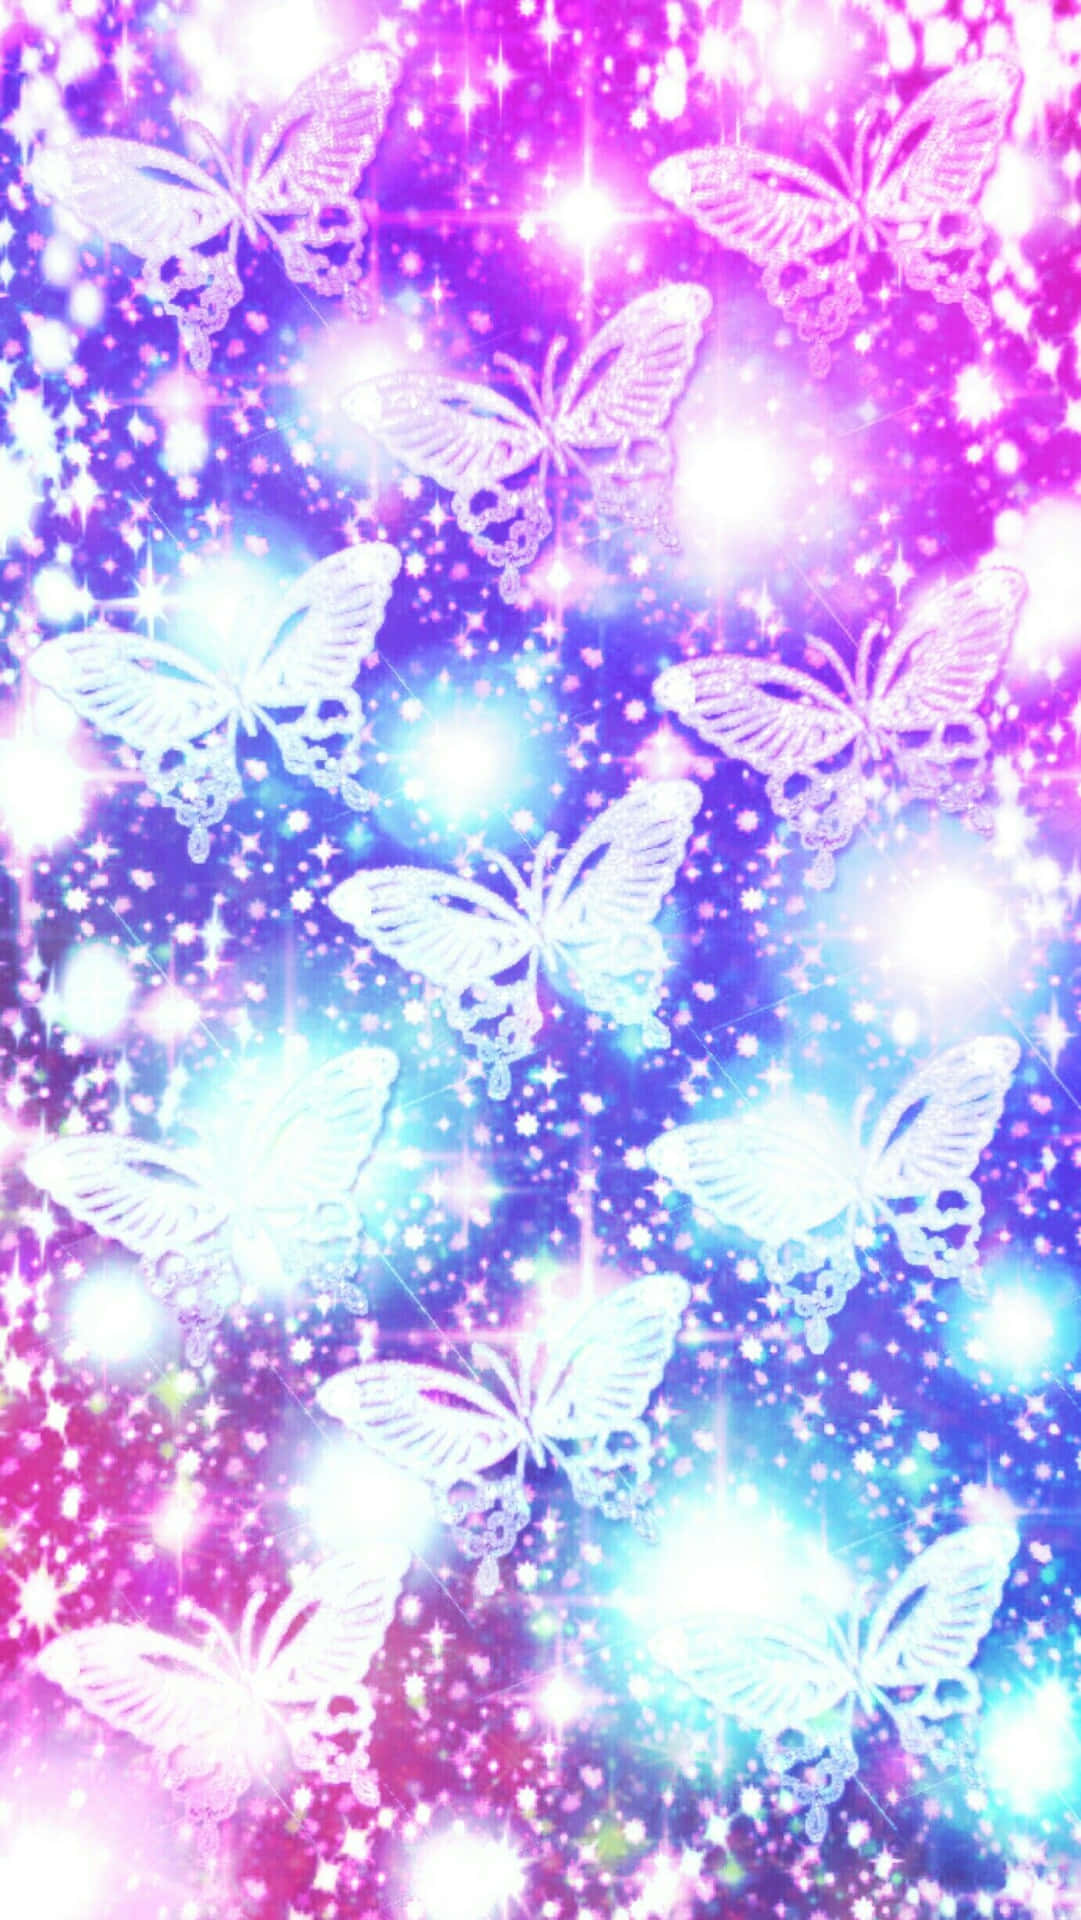 Beautify your home decor with a glistening pink butterfly Wallpaper